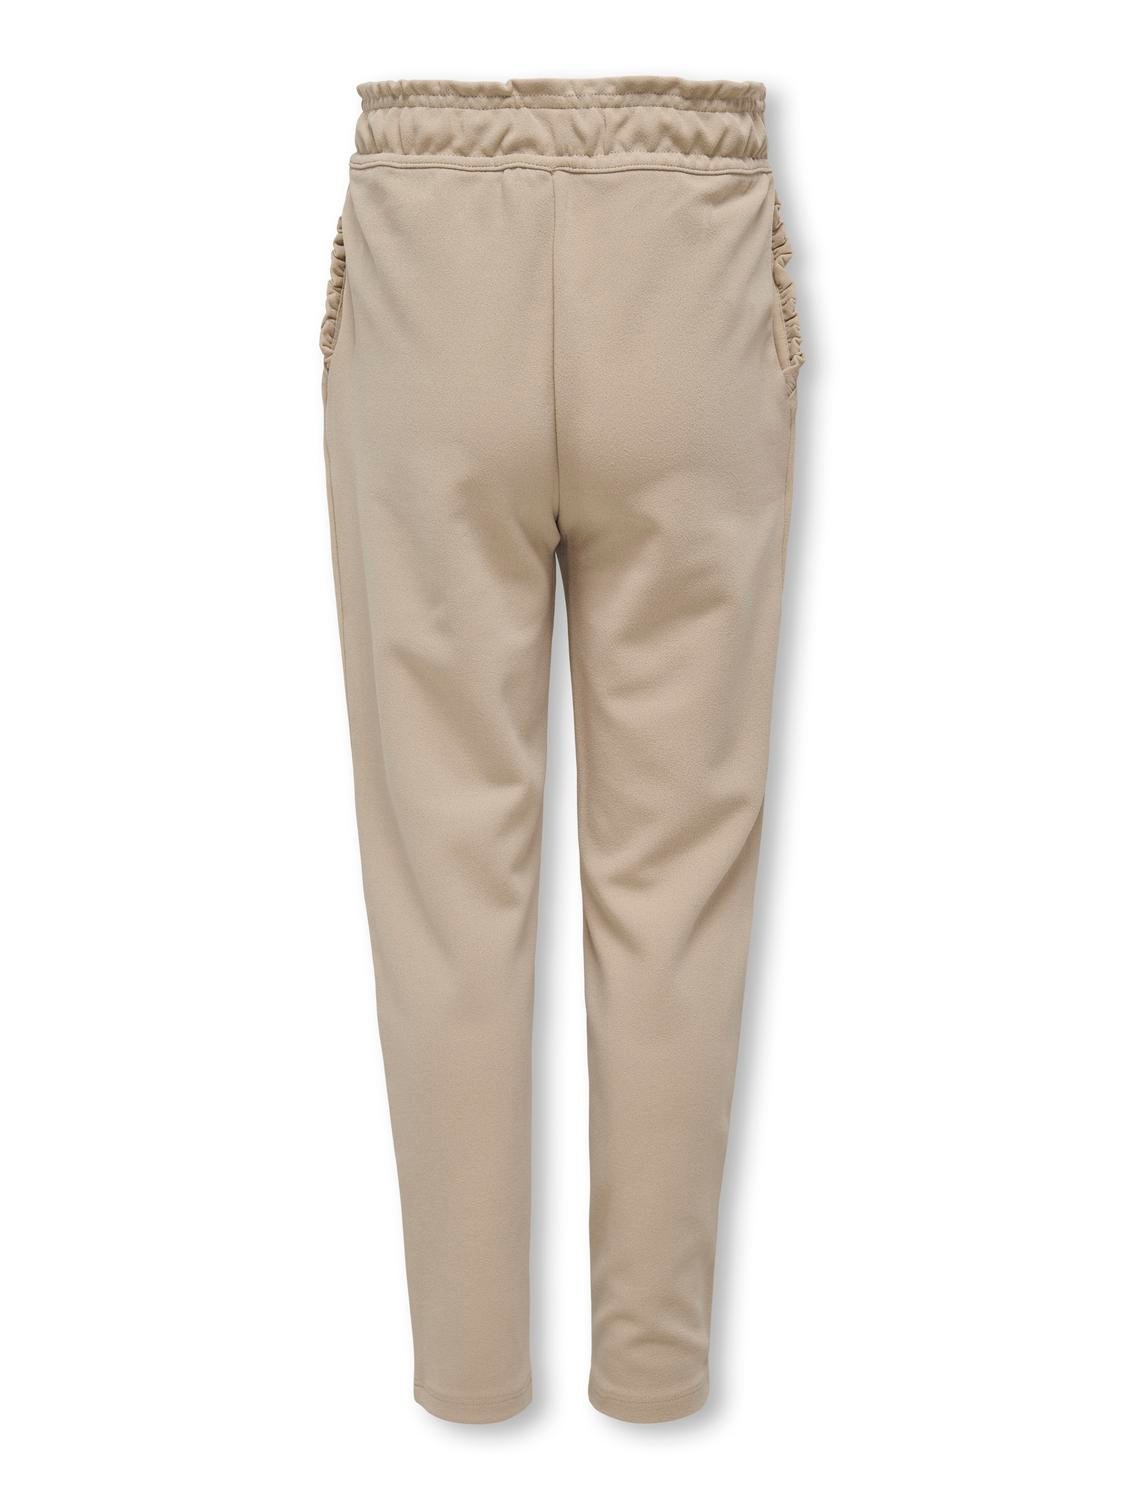 ONLY Slim Fit Trousers -Humus - 15327743